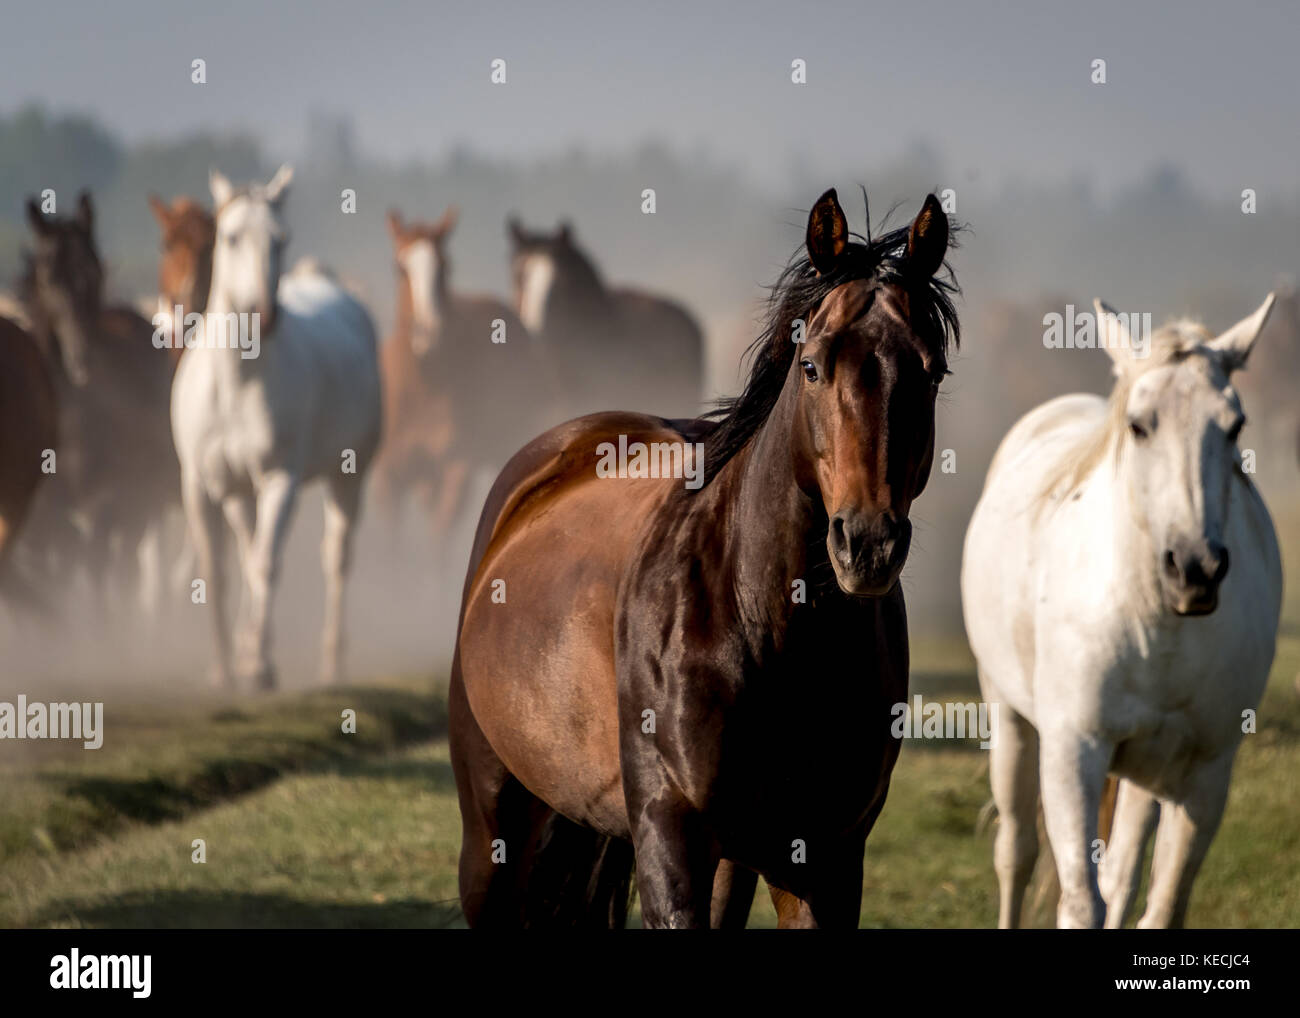 Intense gaze of horse looking at camera with the herd of horses standing behind it, all American horses in the western USA Stock Photo